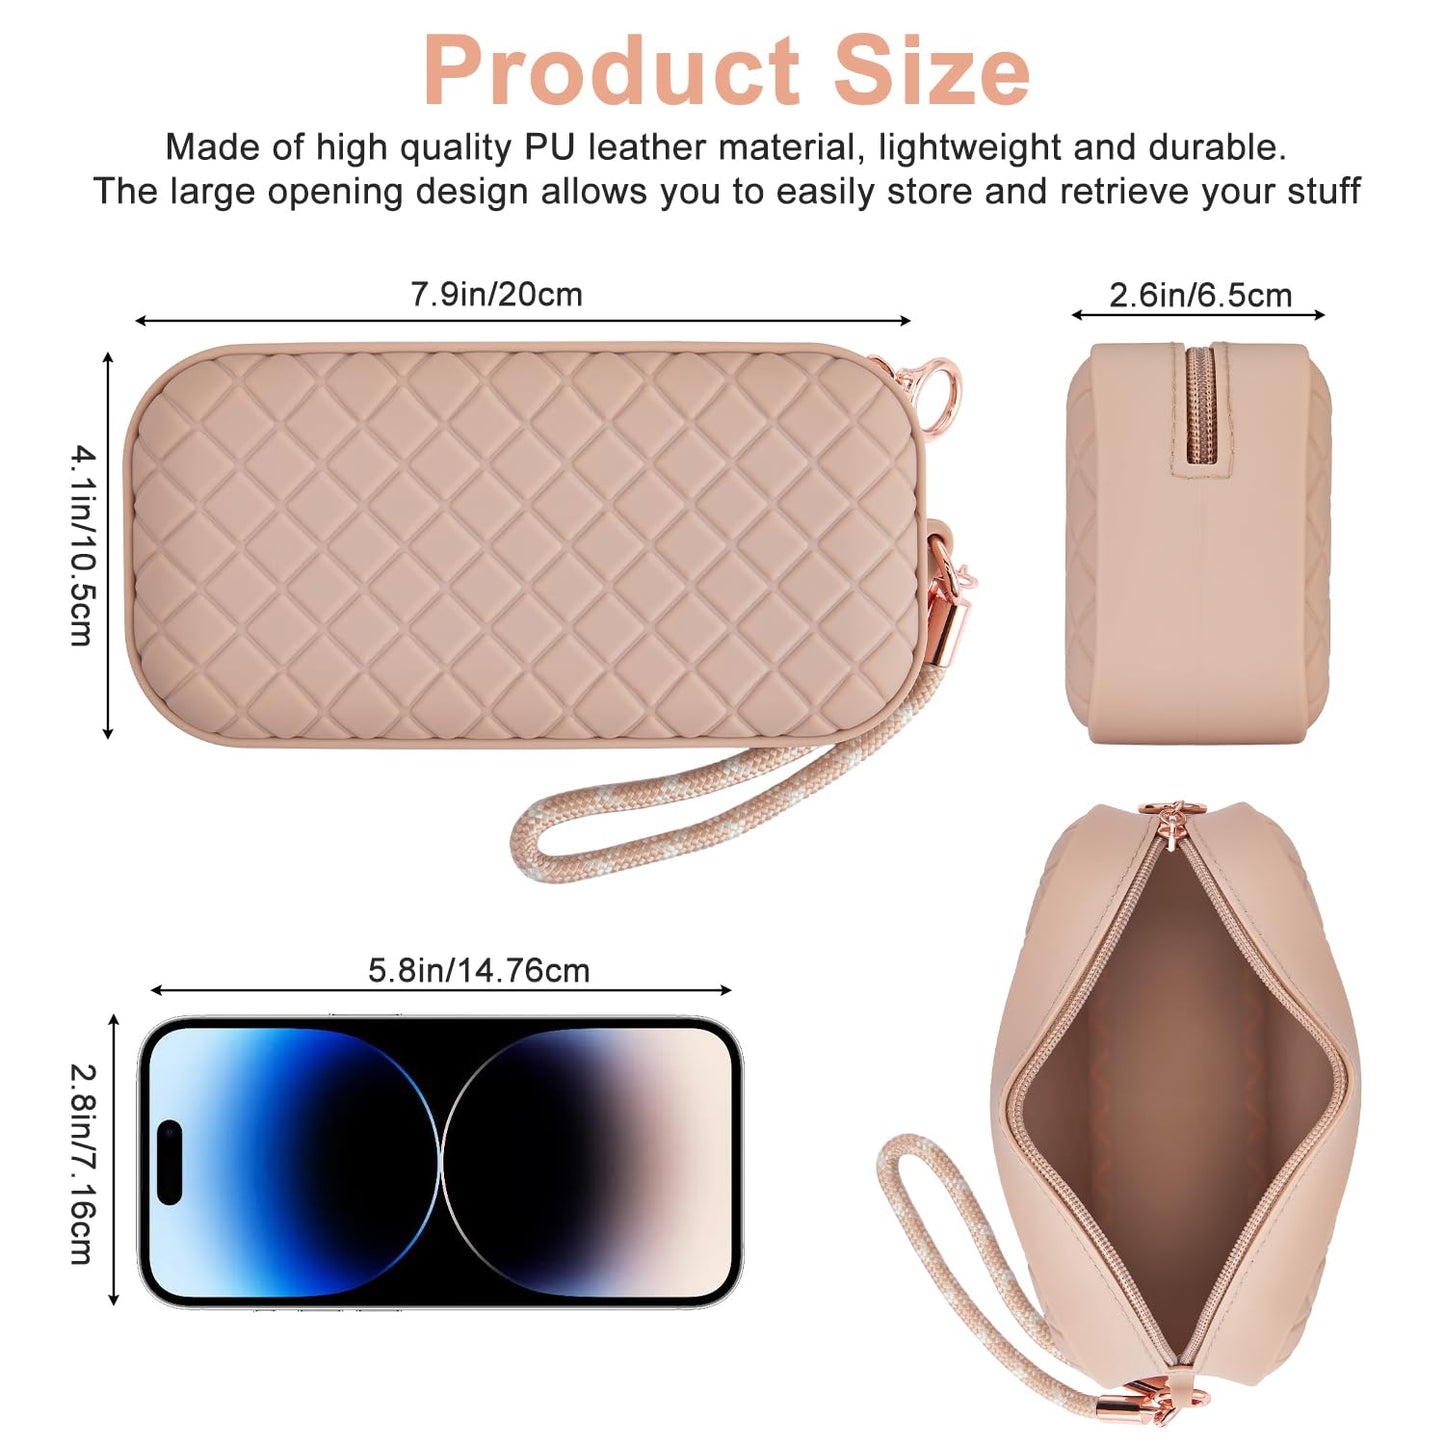 AGIKET Portable Travel Makeup Bag,Soft Silicone Waterproof Toiletry Cosmetic Bag for Women,Upgrade Anti-Fall Out Zipper Closure Organizer Makeup Case -(Khaki)